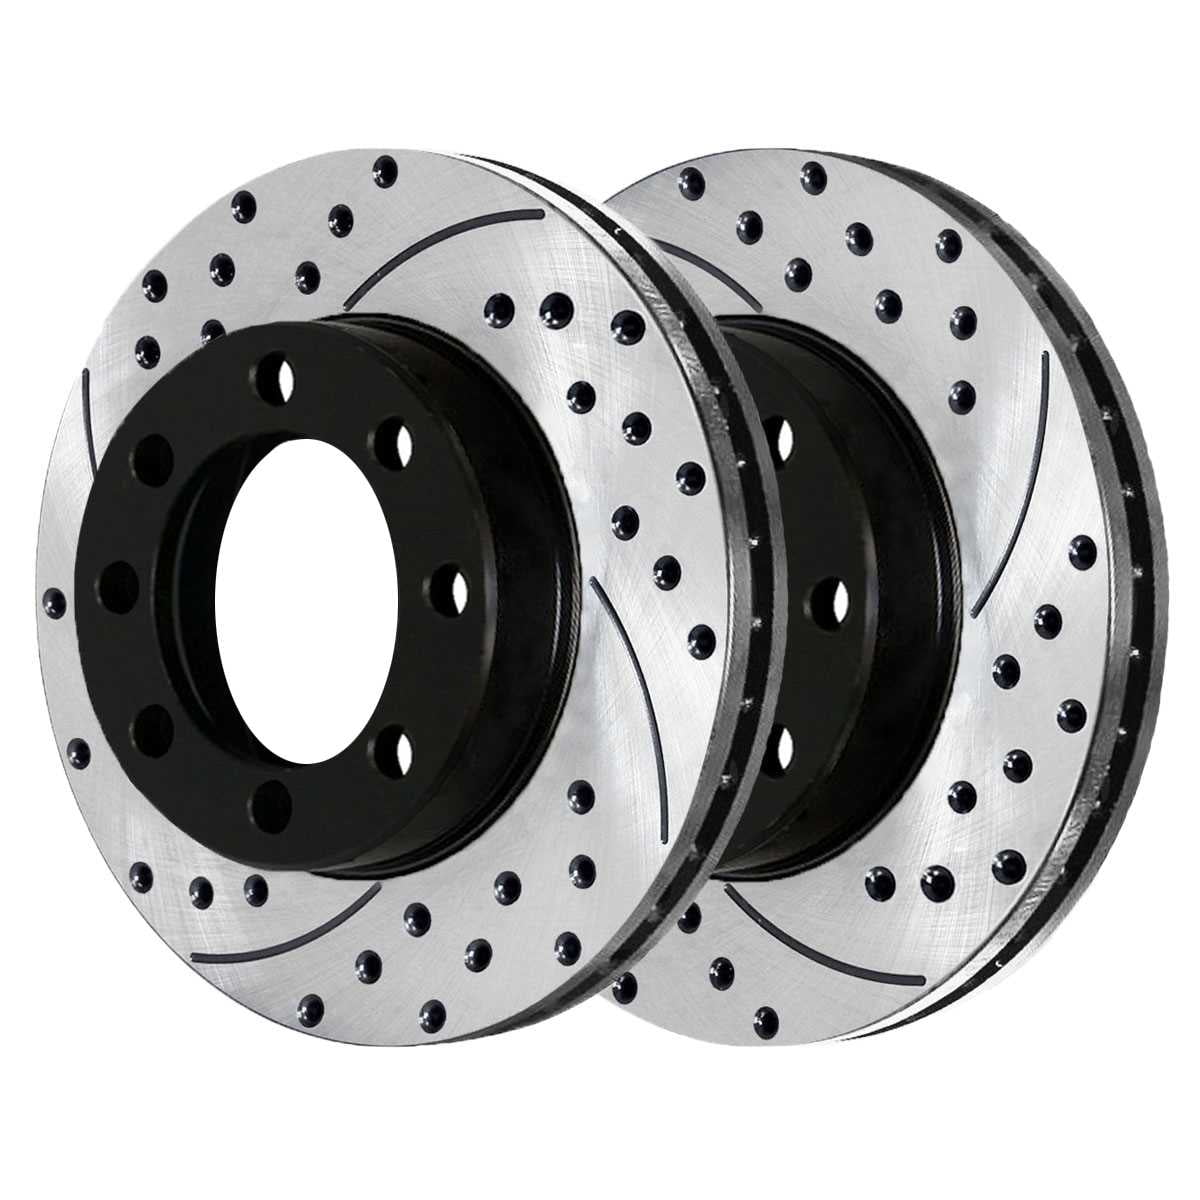 Front Coated Drilled Slotted Disc Brake Rotors And Ceramic Pads Kit For Ram 2500 3500 1500 Dodge